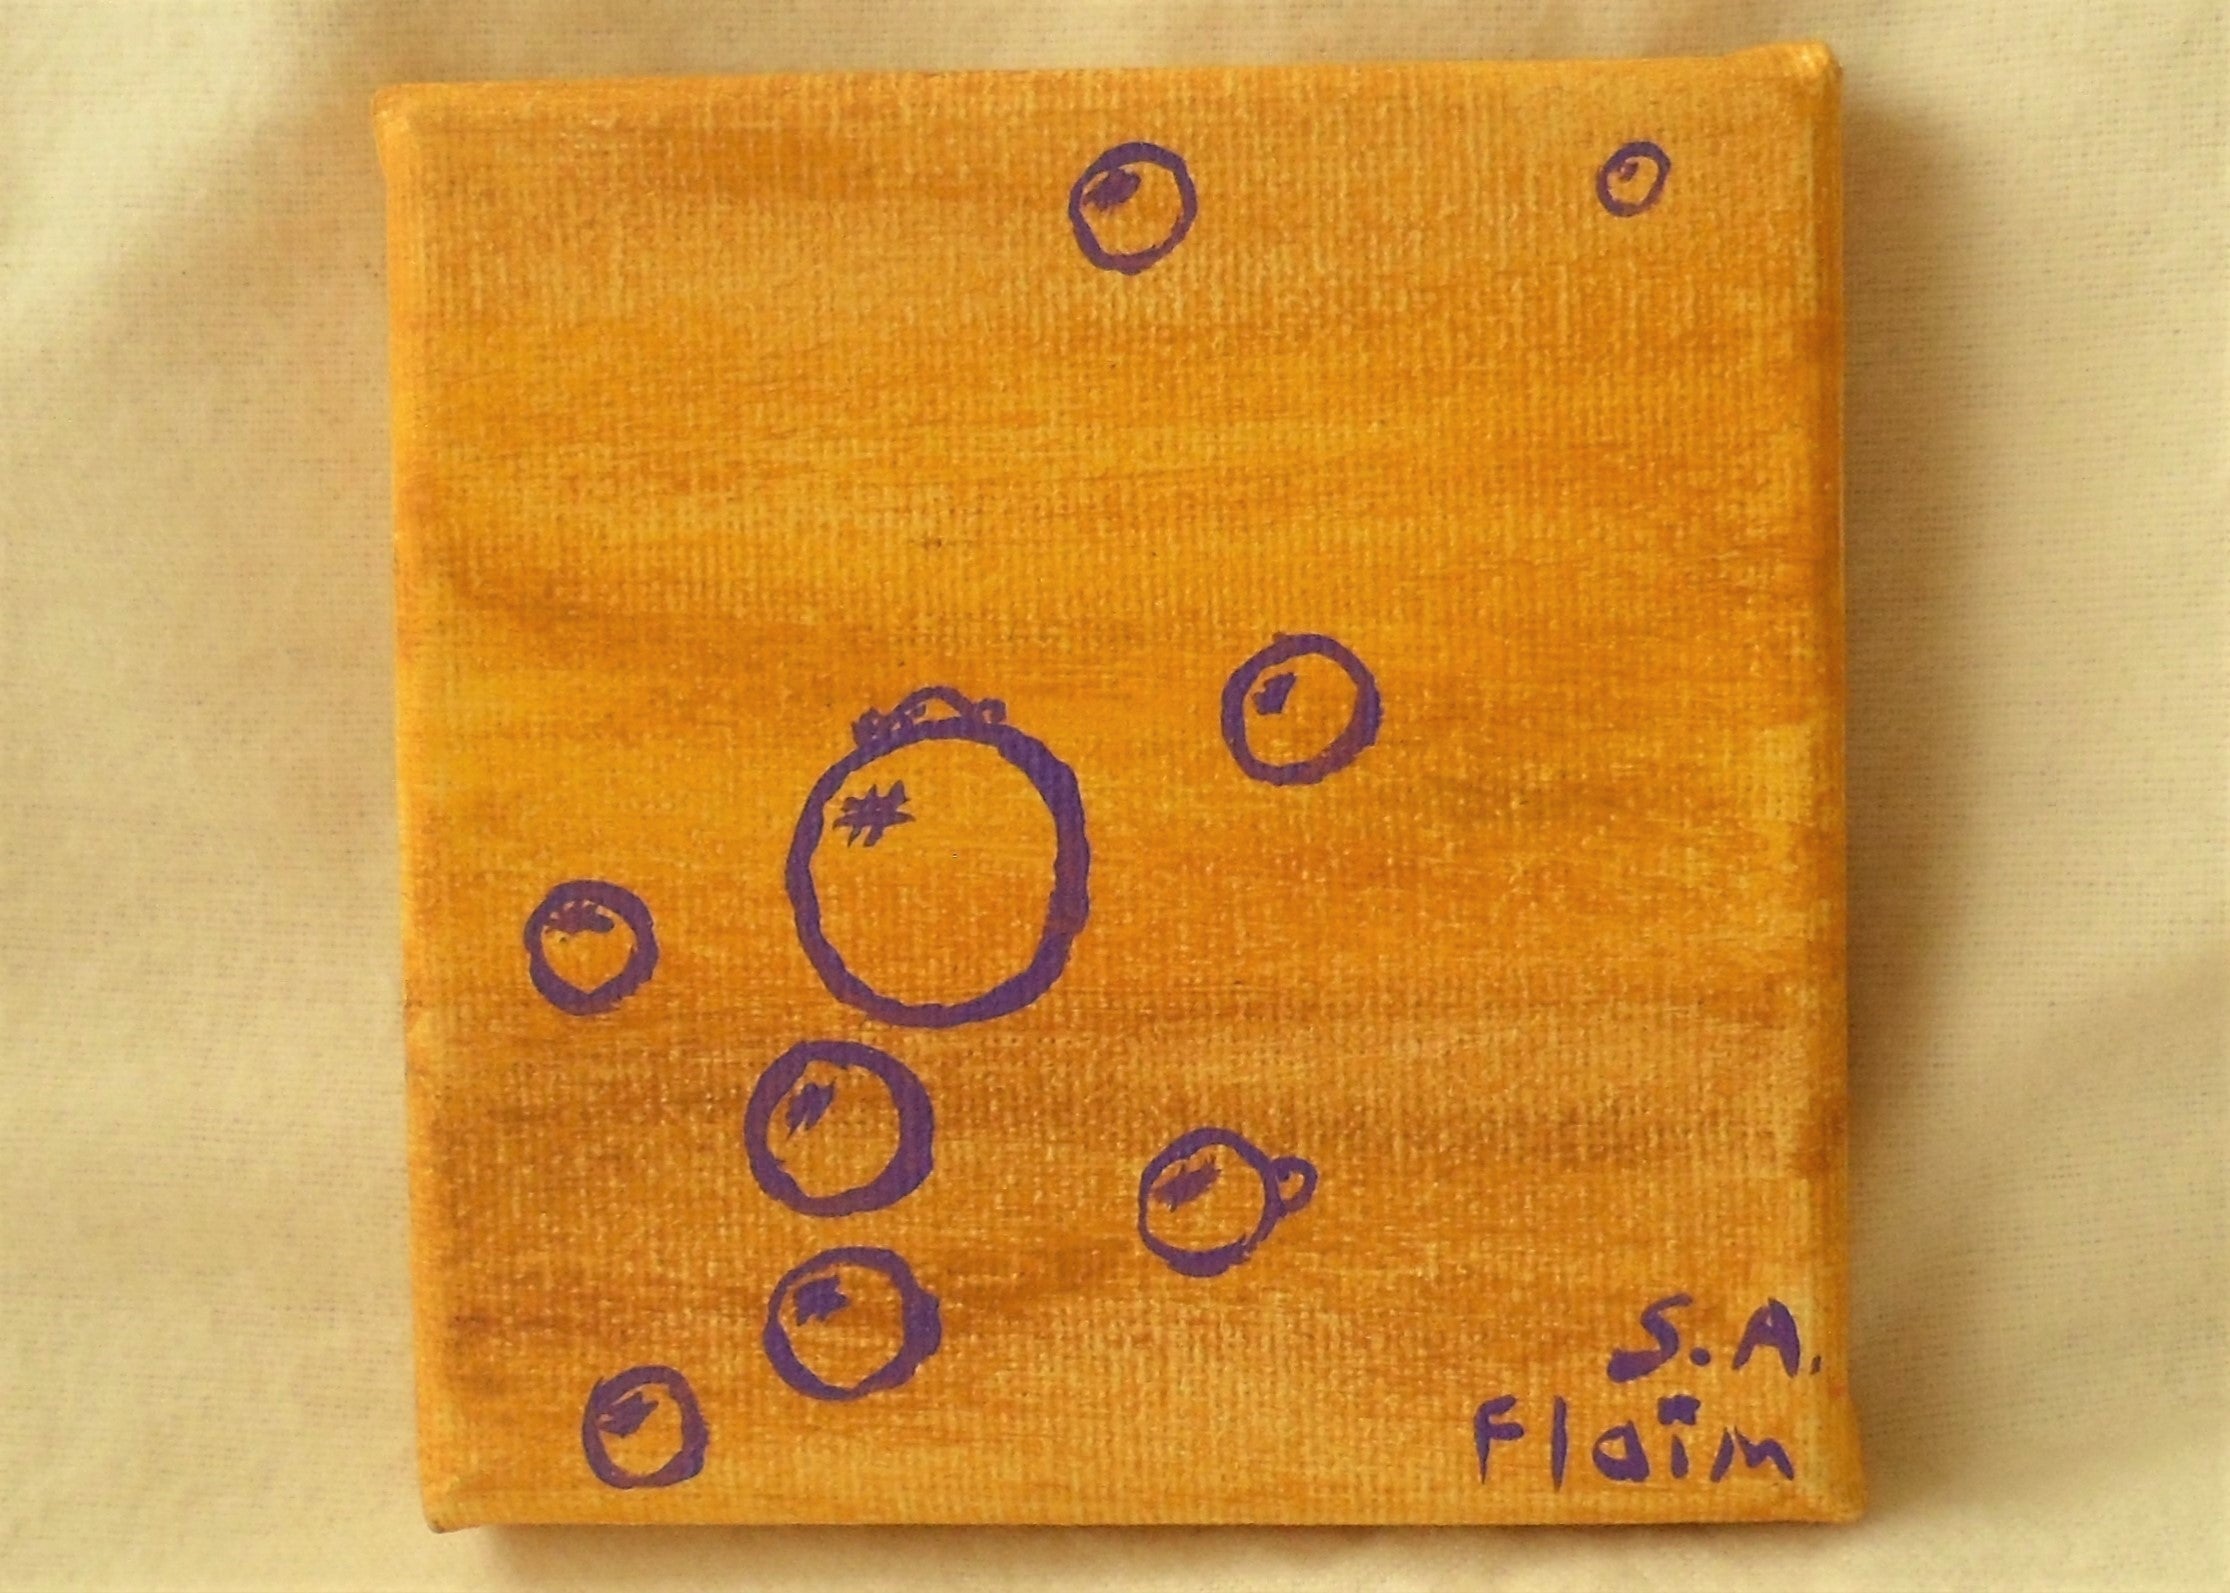 Intersex Inspired Mini Canvas by S.A.Flaim - Tully Crafts